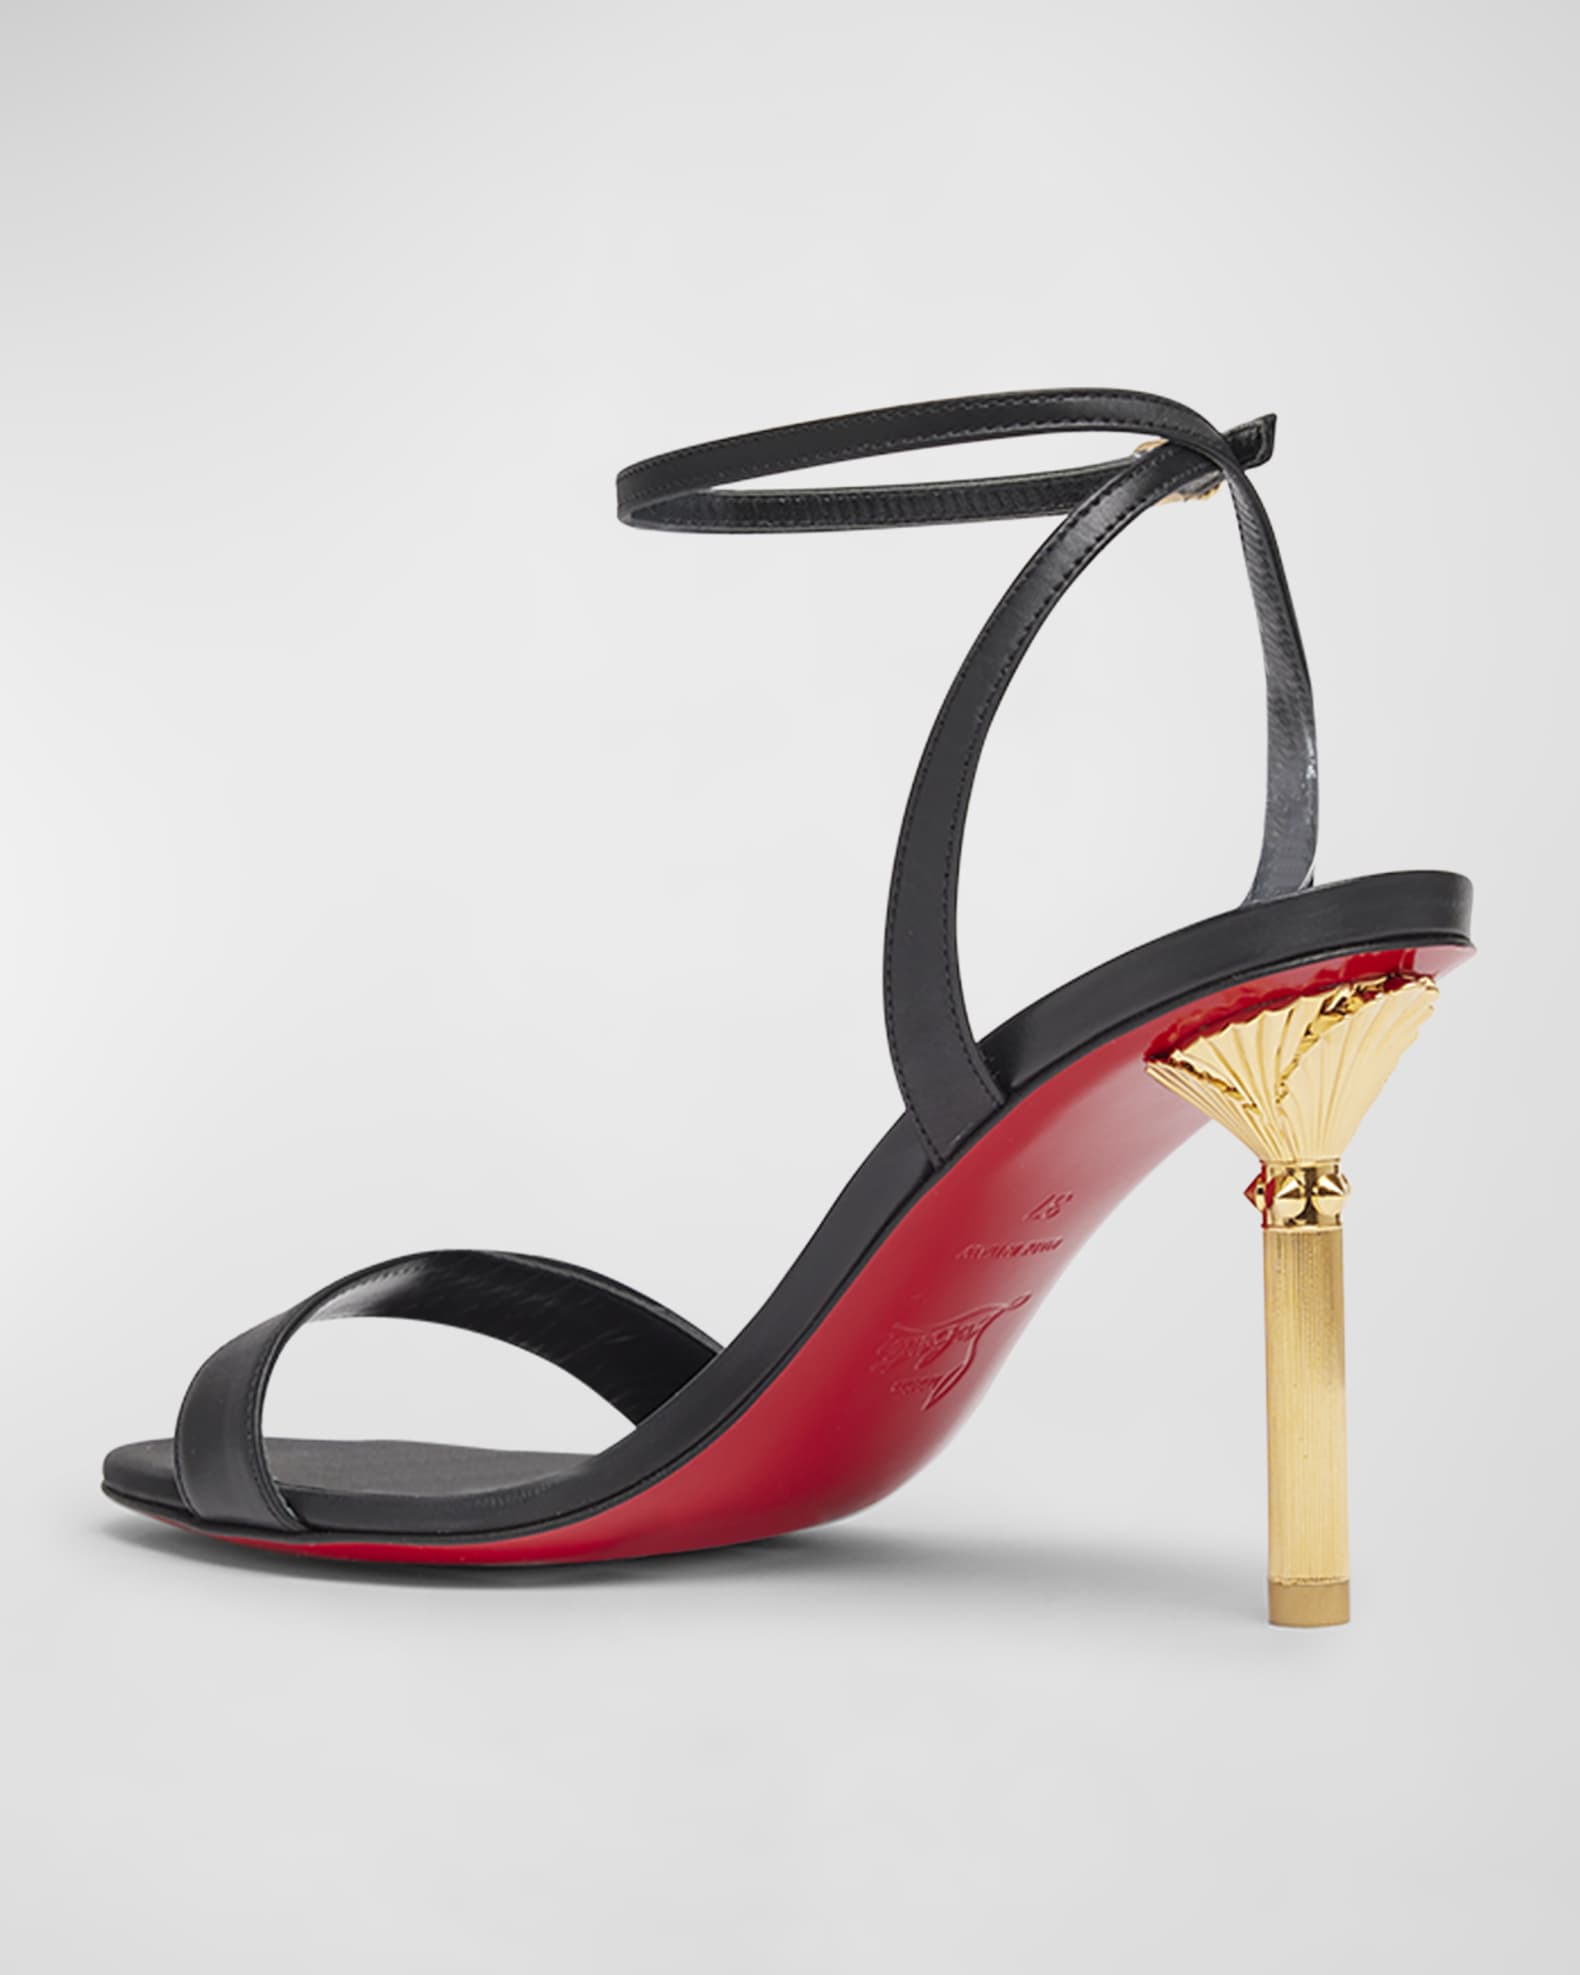 Christian Louboutin Leather Ankle-Strap Red Sole Sandals | Neiman Marcus